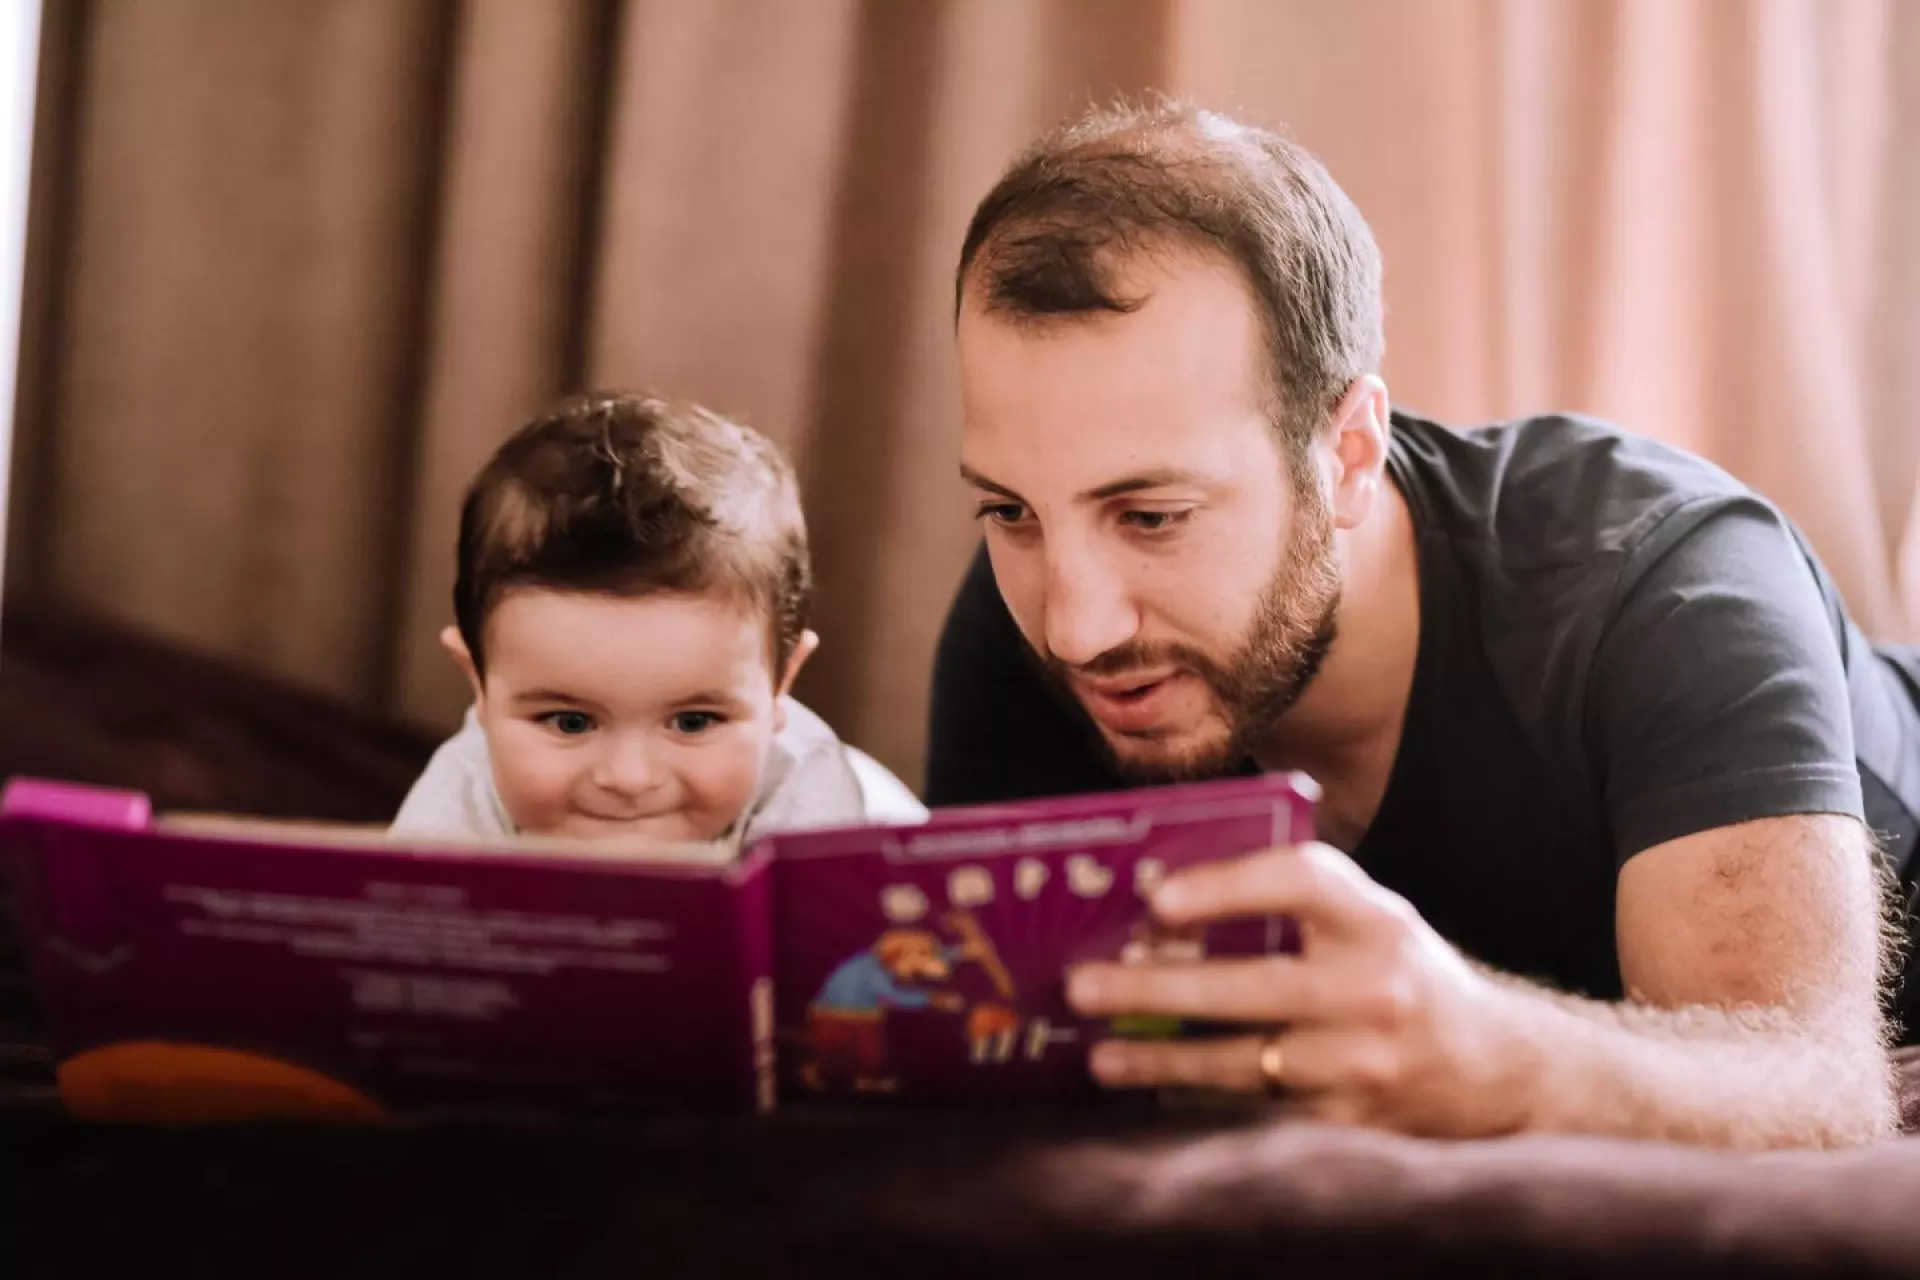 In Armenia, a father shows pictures from a book to his baby son.